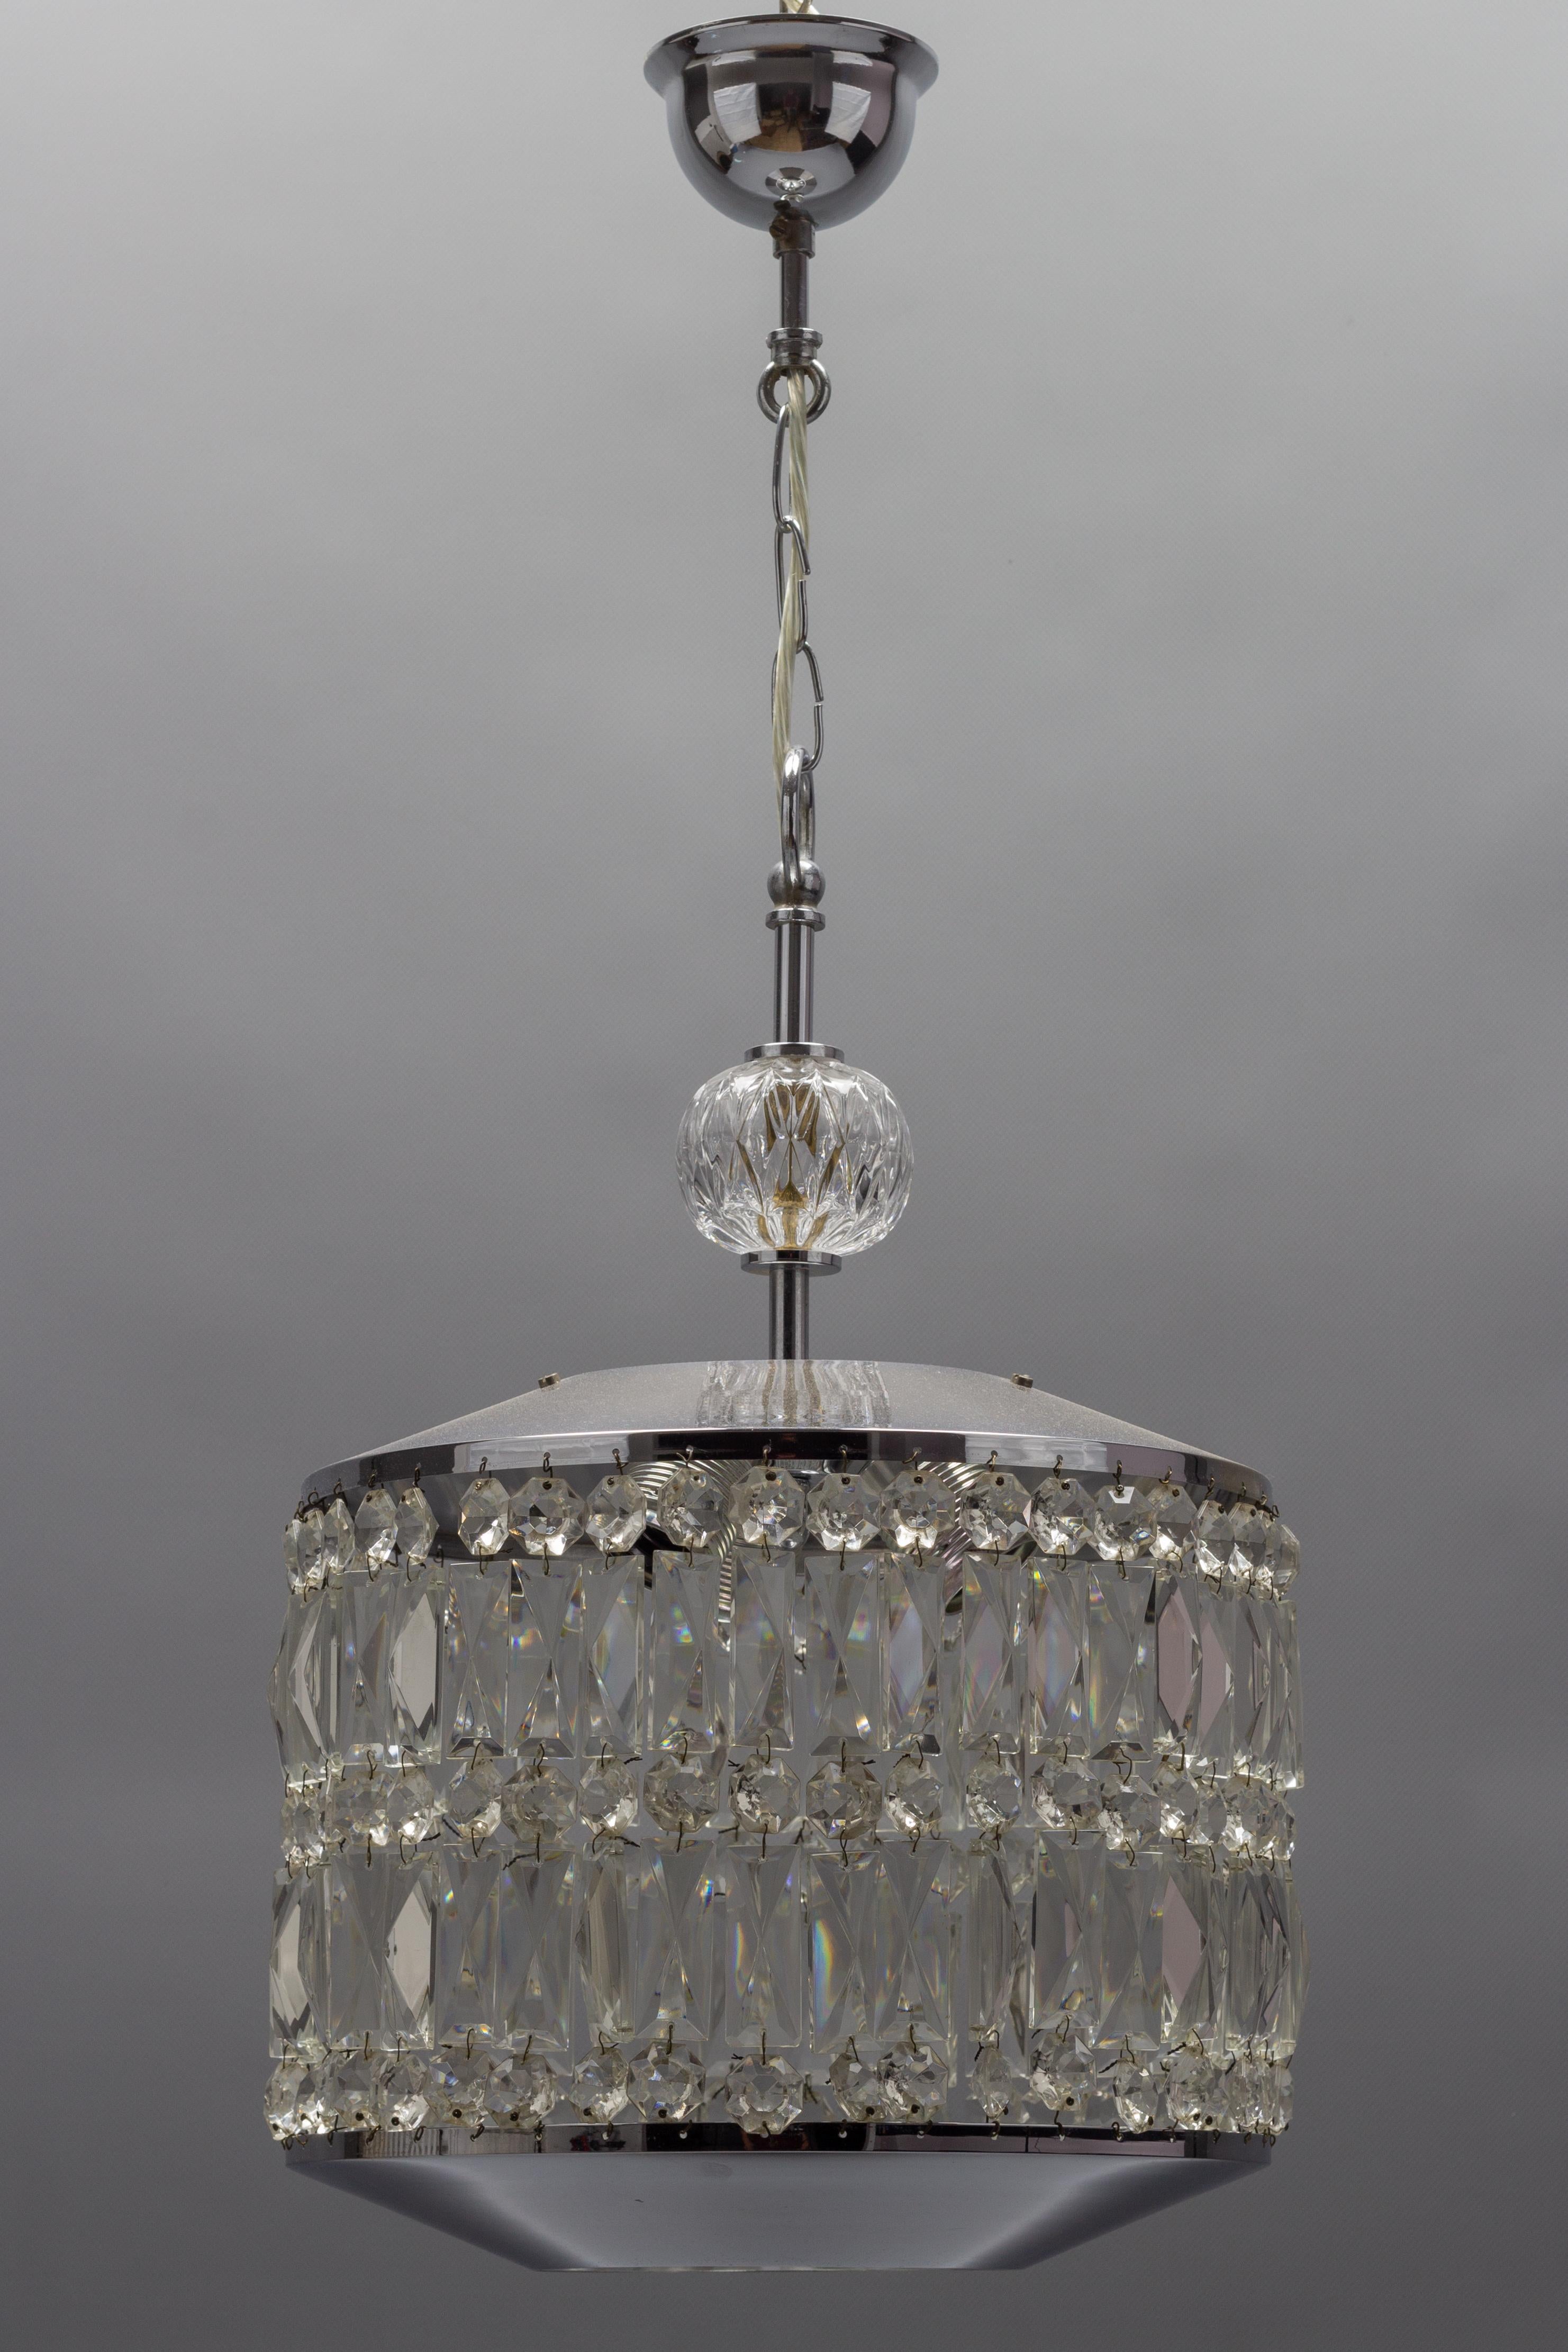 Metal German Mid-Century Modern Crystal Glass and Chrome Chandelier or Pendant Light For Sale